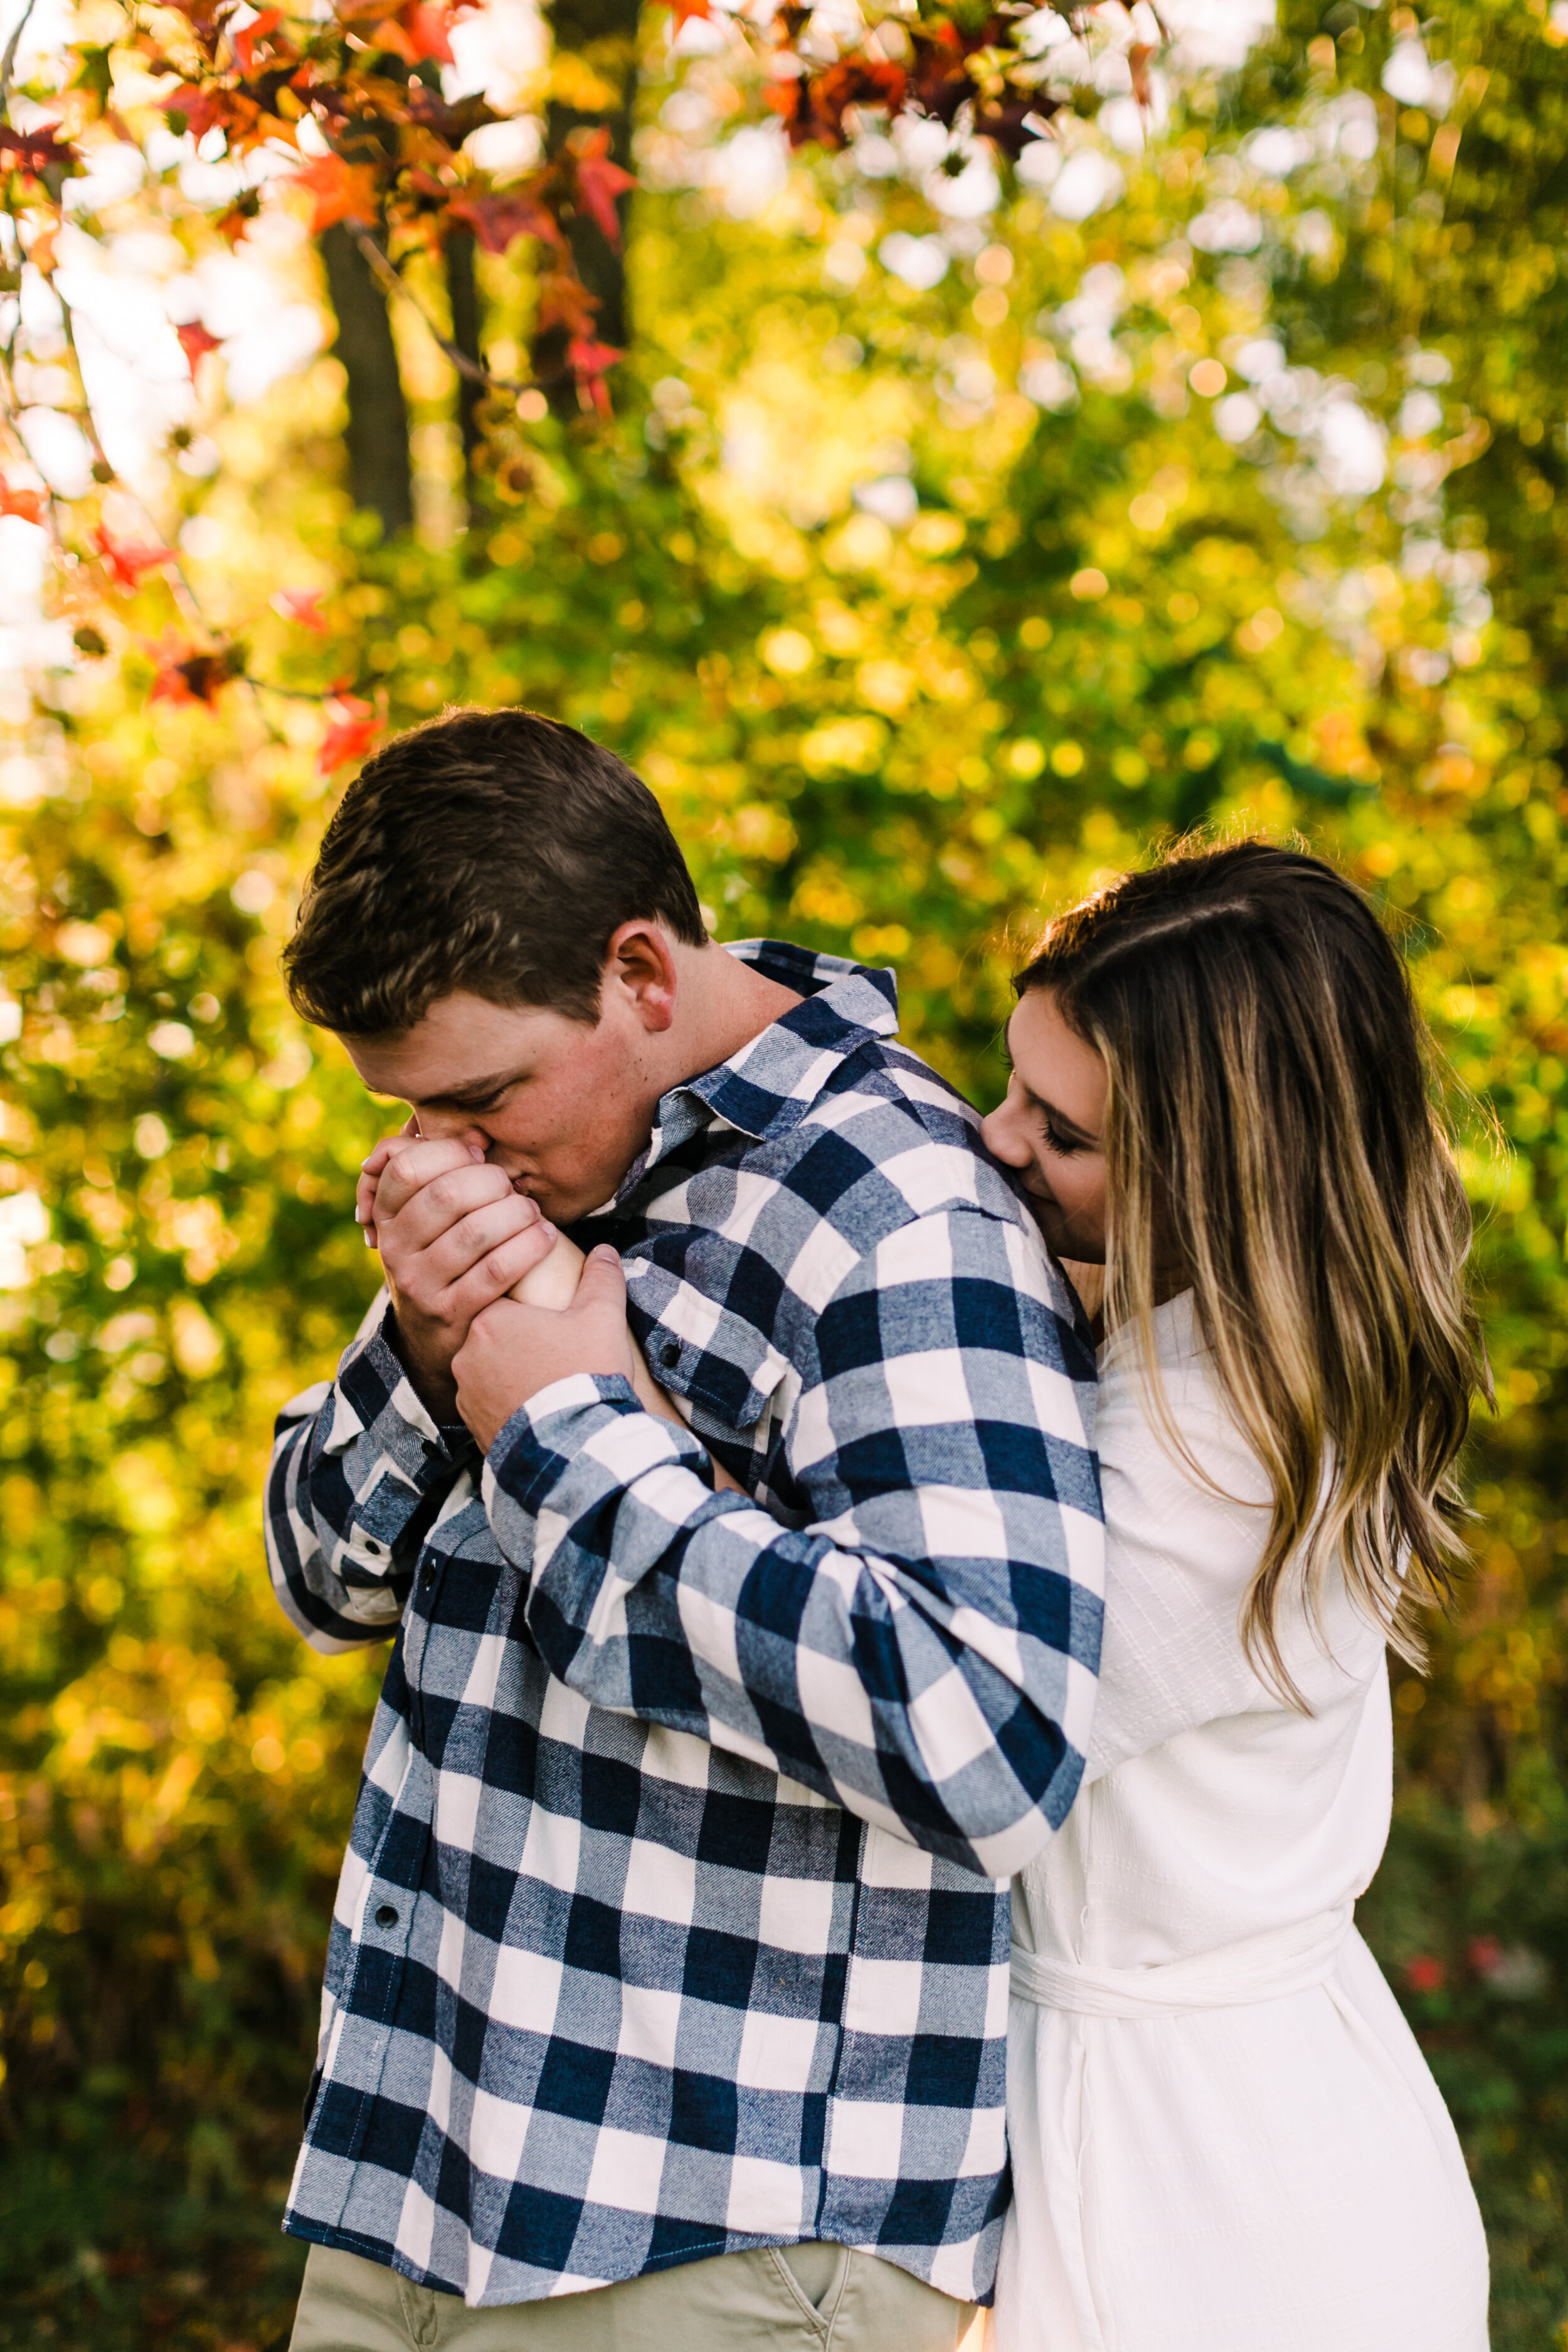 Tennessee+Fall+Engagement+Photos+Puppy (43 of 63).jpg